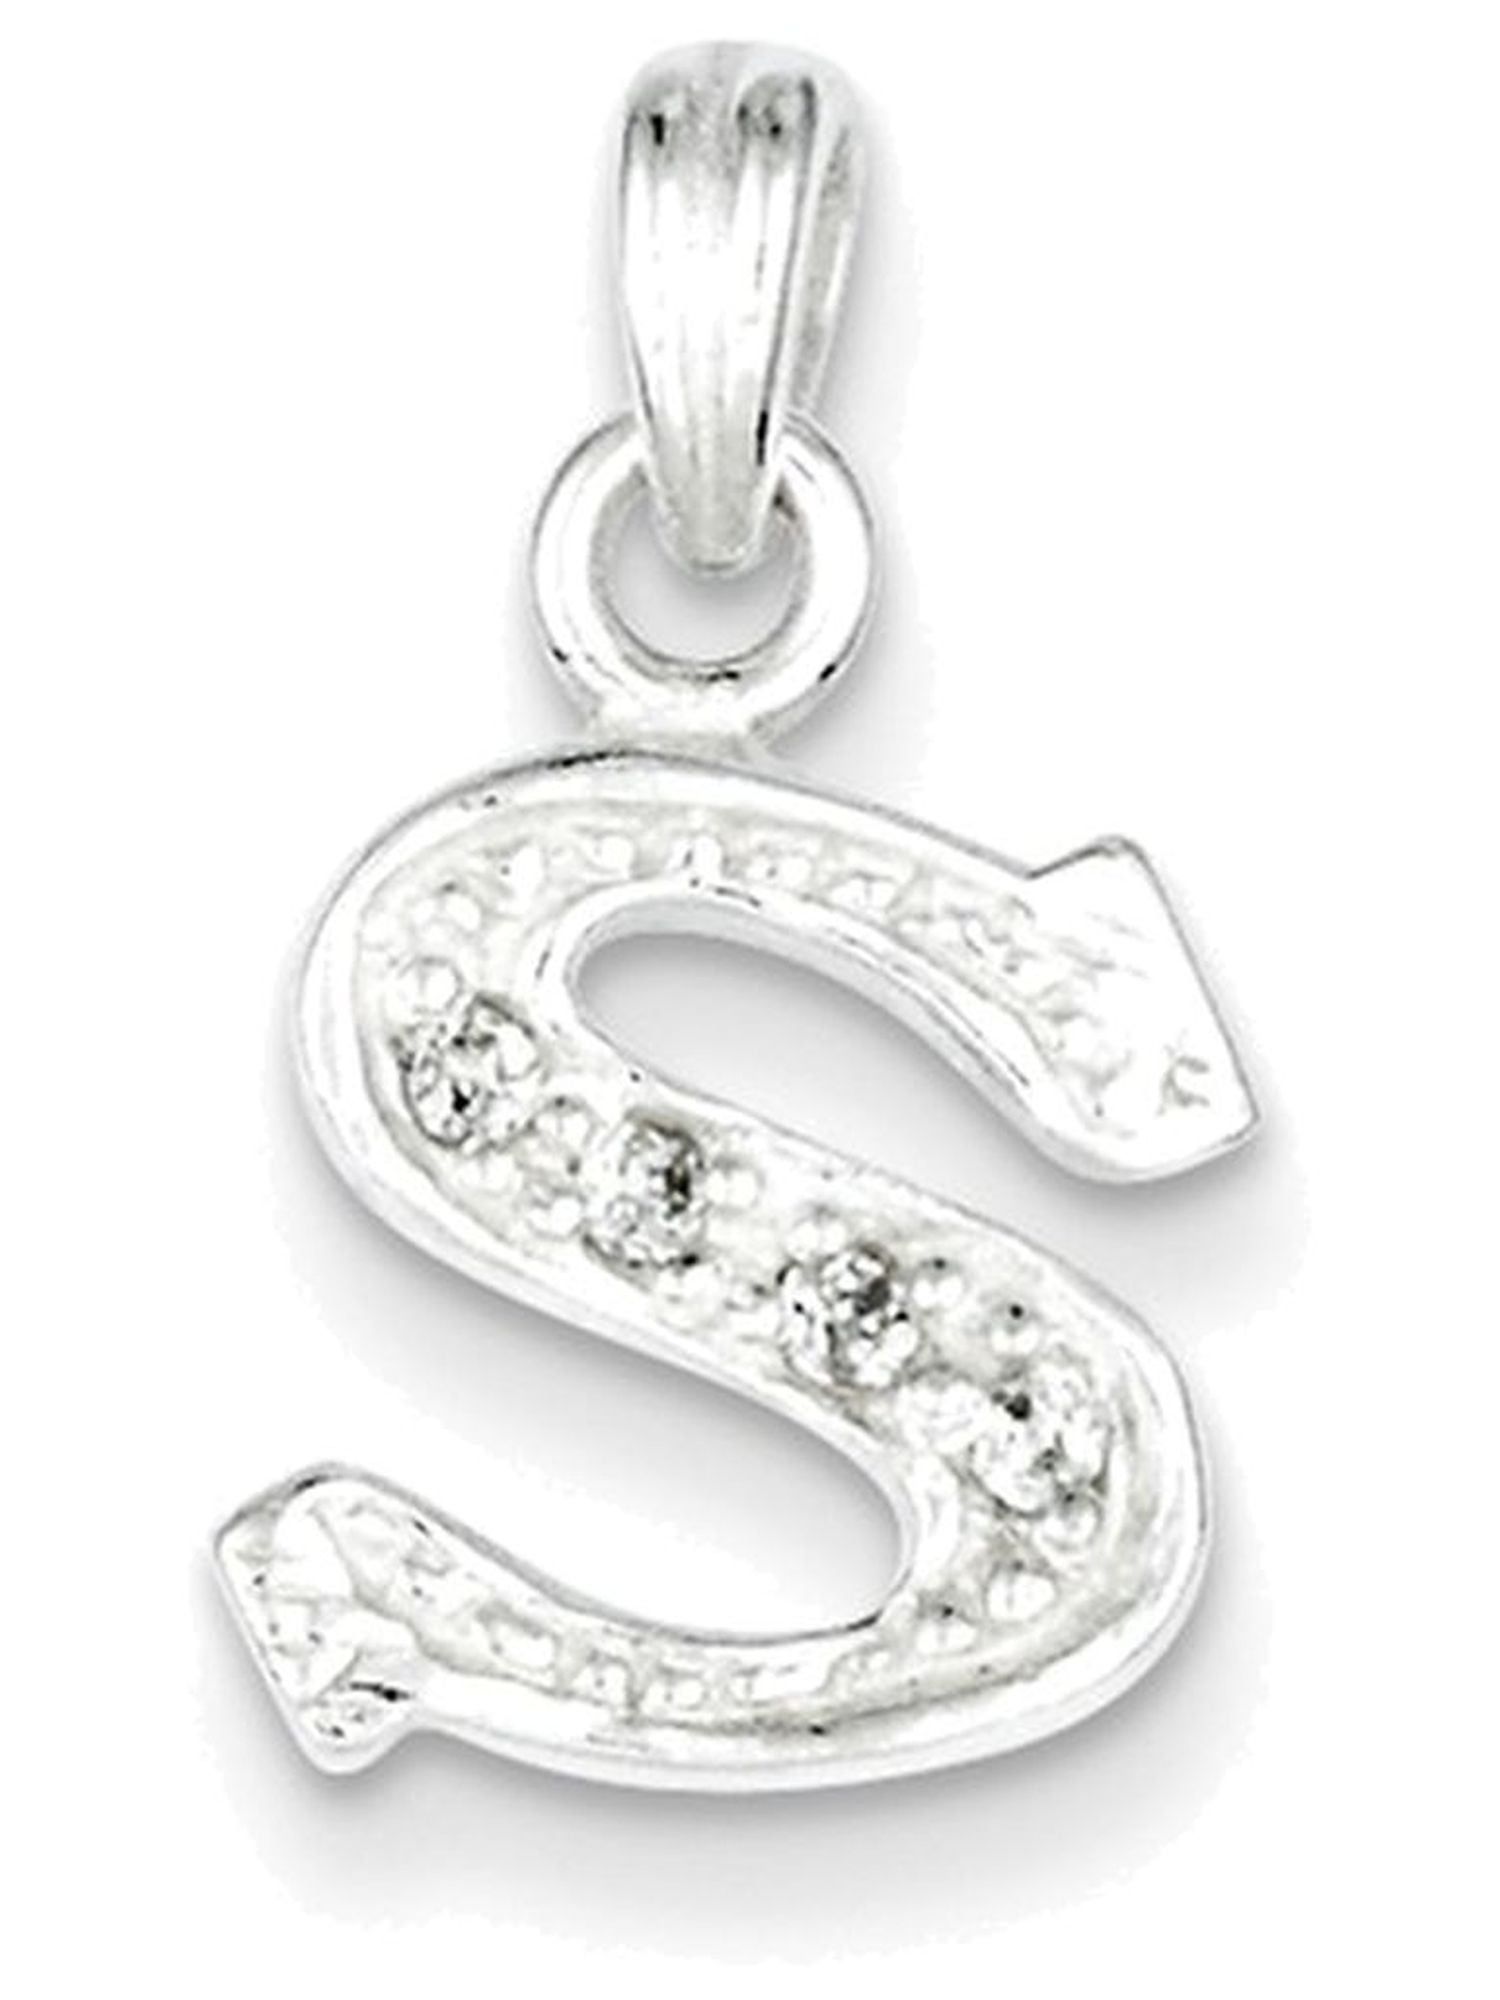 PriceRock Sterling Silver Black and White Diamond Heart Pendant Necklace 18 Inches Long